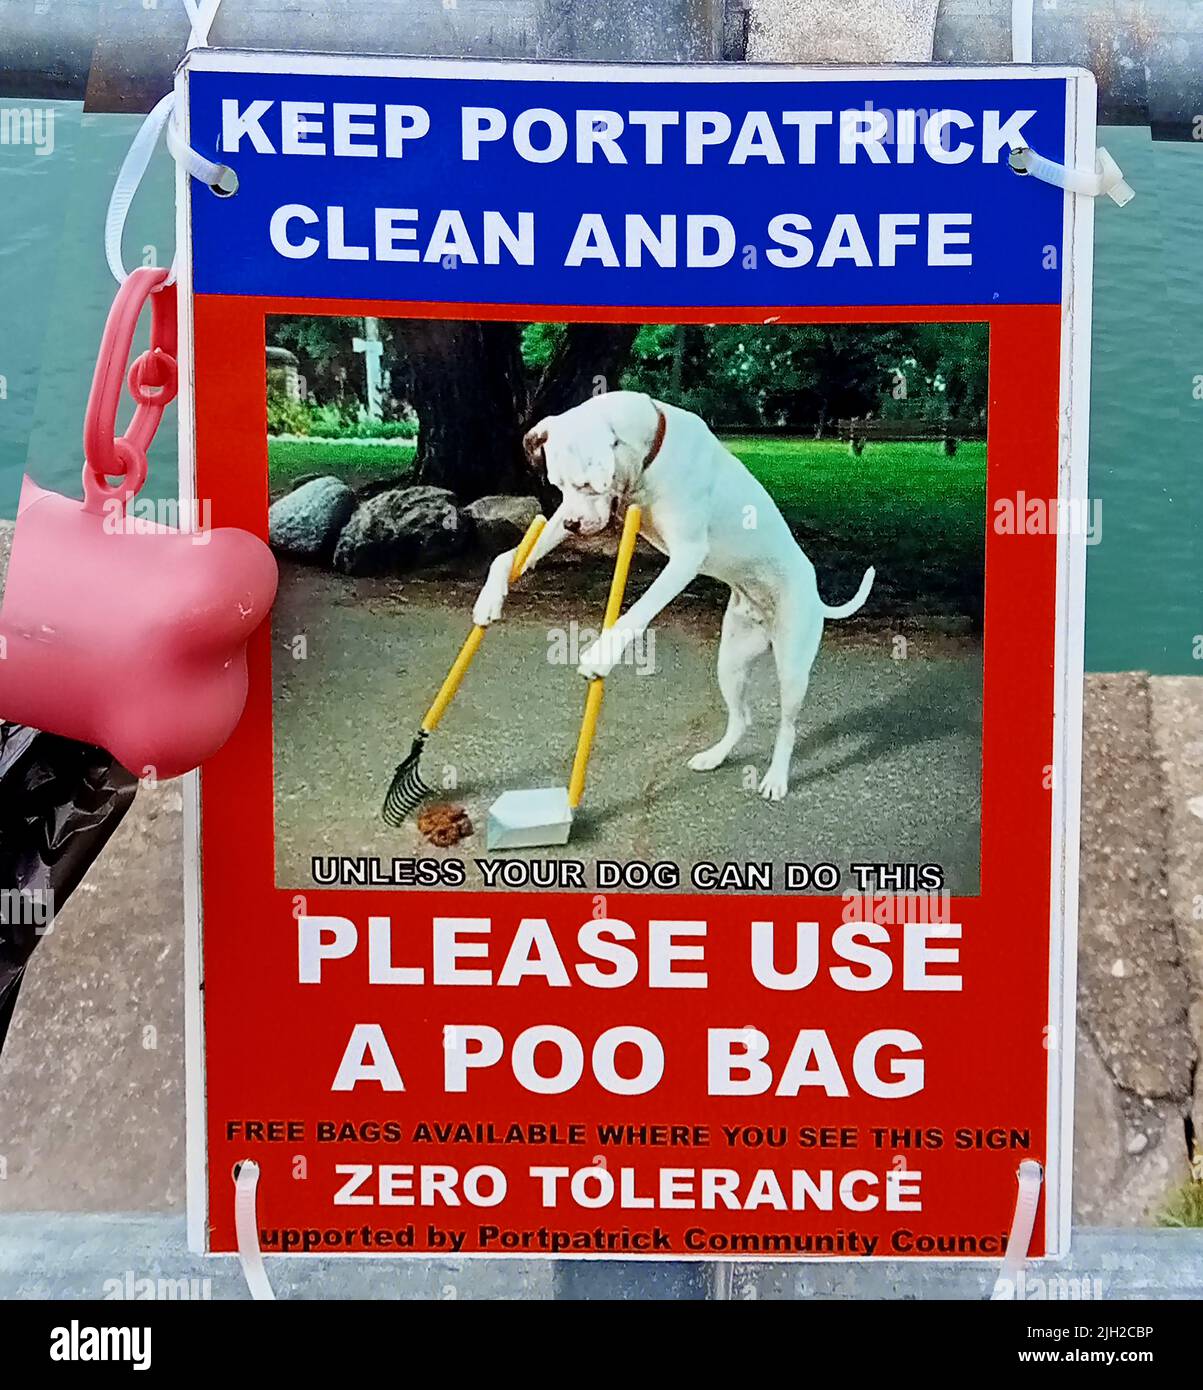 A DOG CLEANING UP ITS OWN MESS - Port Patrick Community Council (Scotland) humorous poster  advising  dog walkers to use the free dog poo bags situated at various points throughout the village. Portpatrick is a village and civil parish in the historical county of Wigtownshire, Dumfries and Galloway, Scotland. Stock Photo